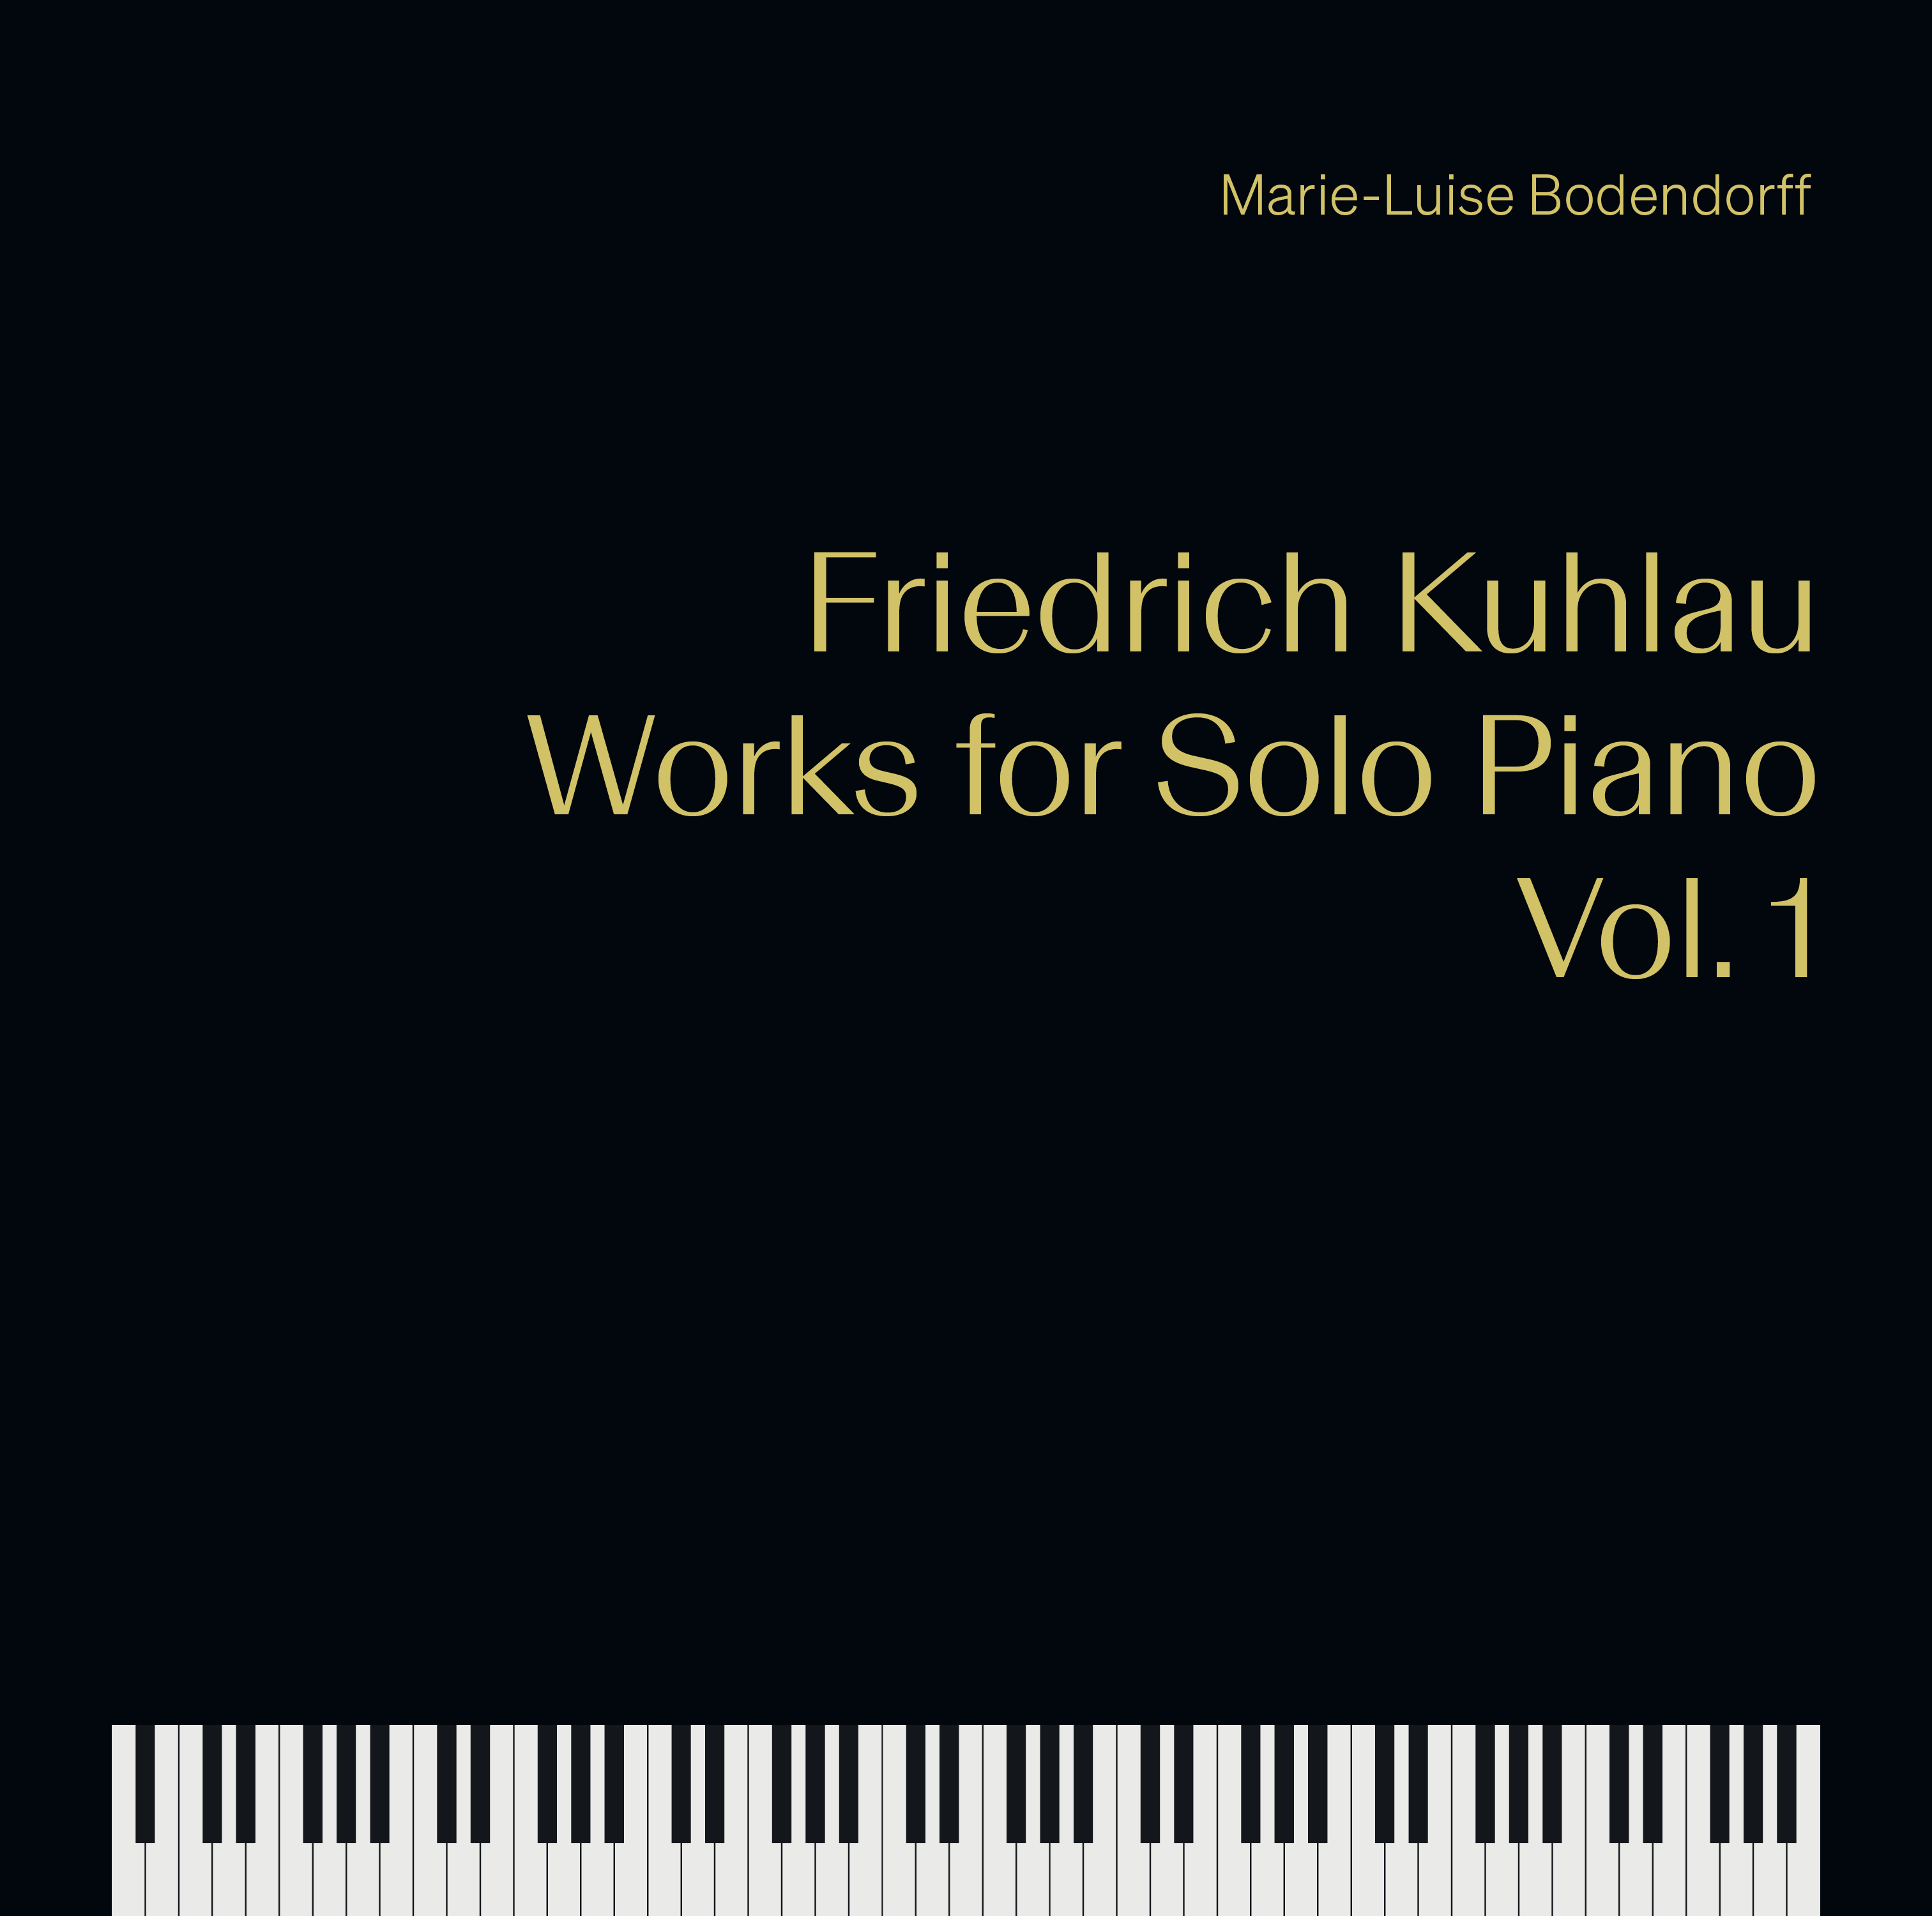 New CD! Friedrich Kuhlau: Works for Solo Piano Vol. 1